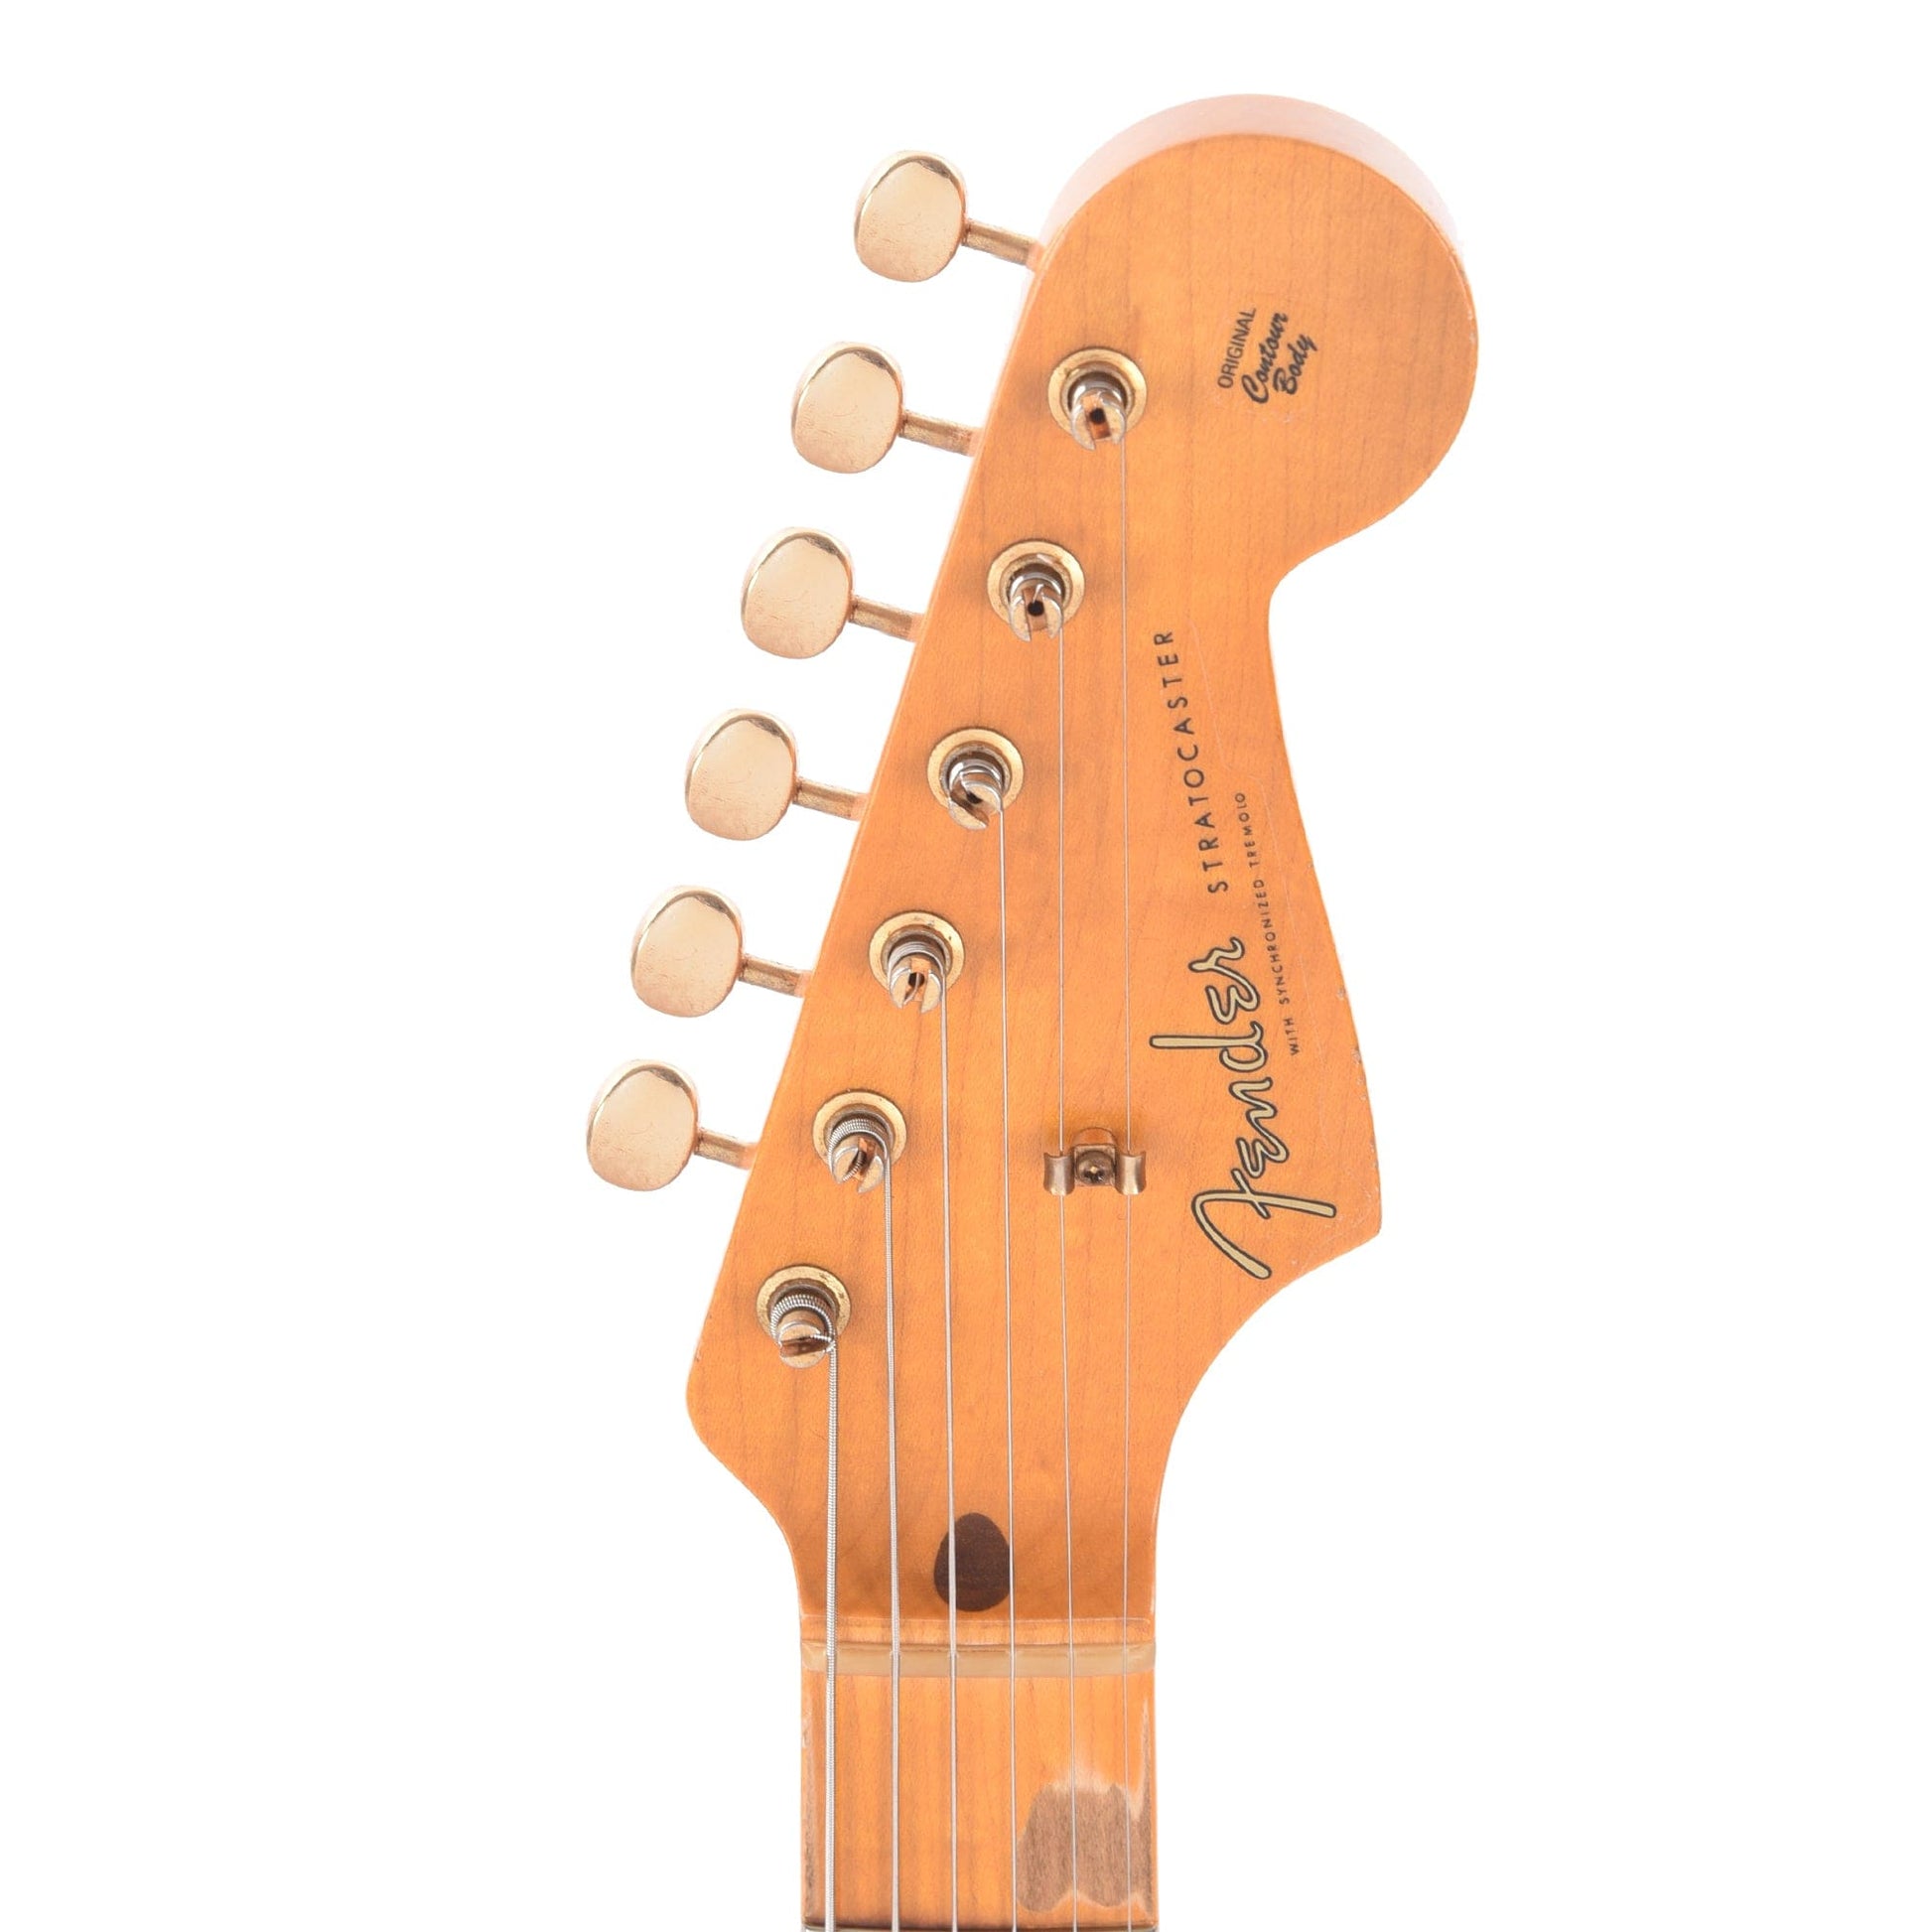 Fender Custom Shop 1955 Stratocaster "Chicago Special" Relic Super Faded Wide Fade Chocolate 2-Color Sunburst w/Gold Hardware & Gold Pickguard Electric Guitars / Solid Body